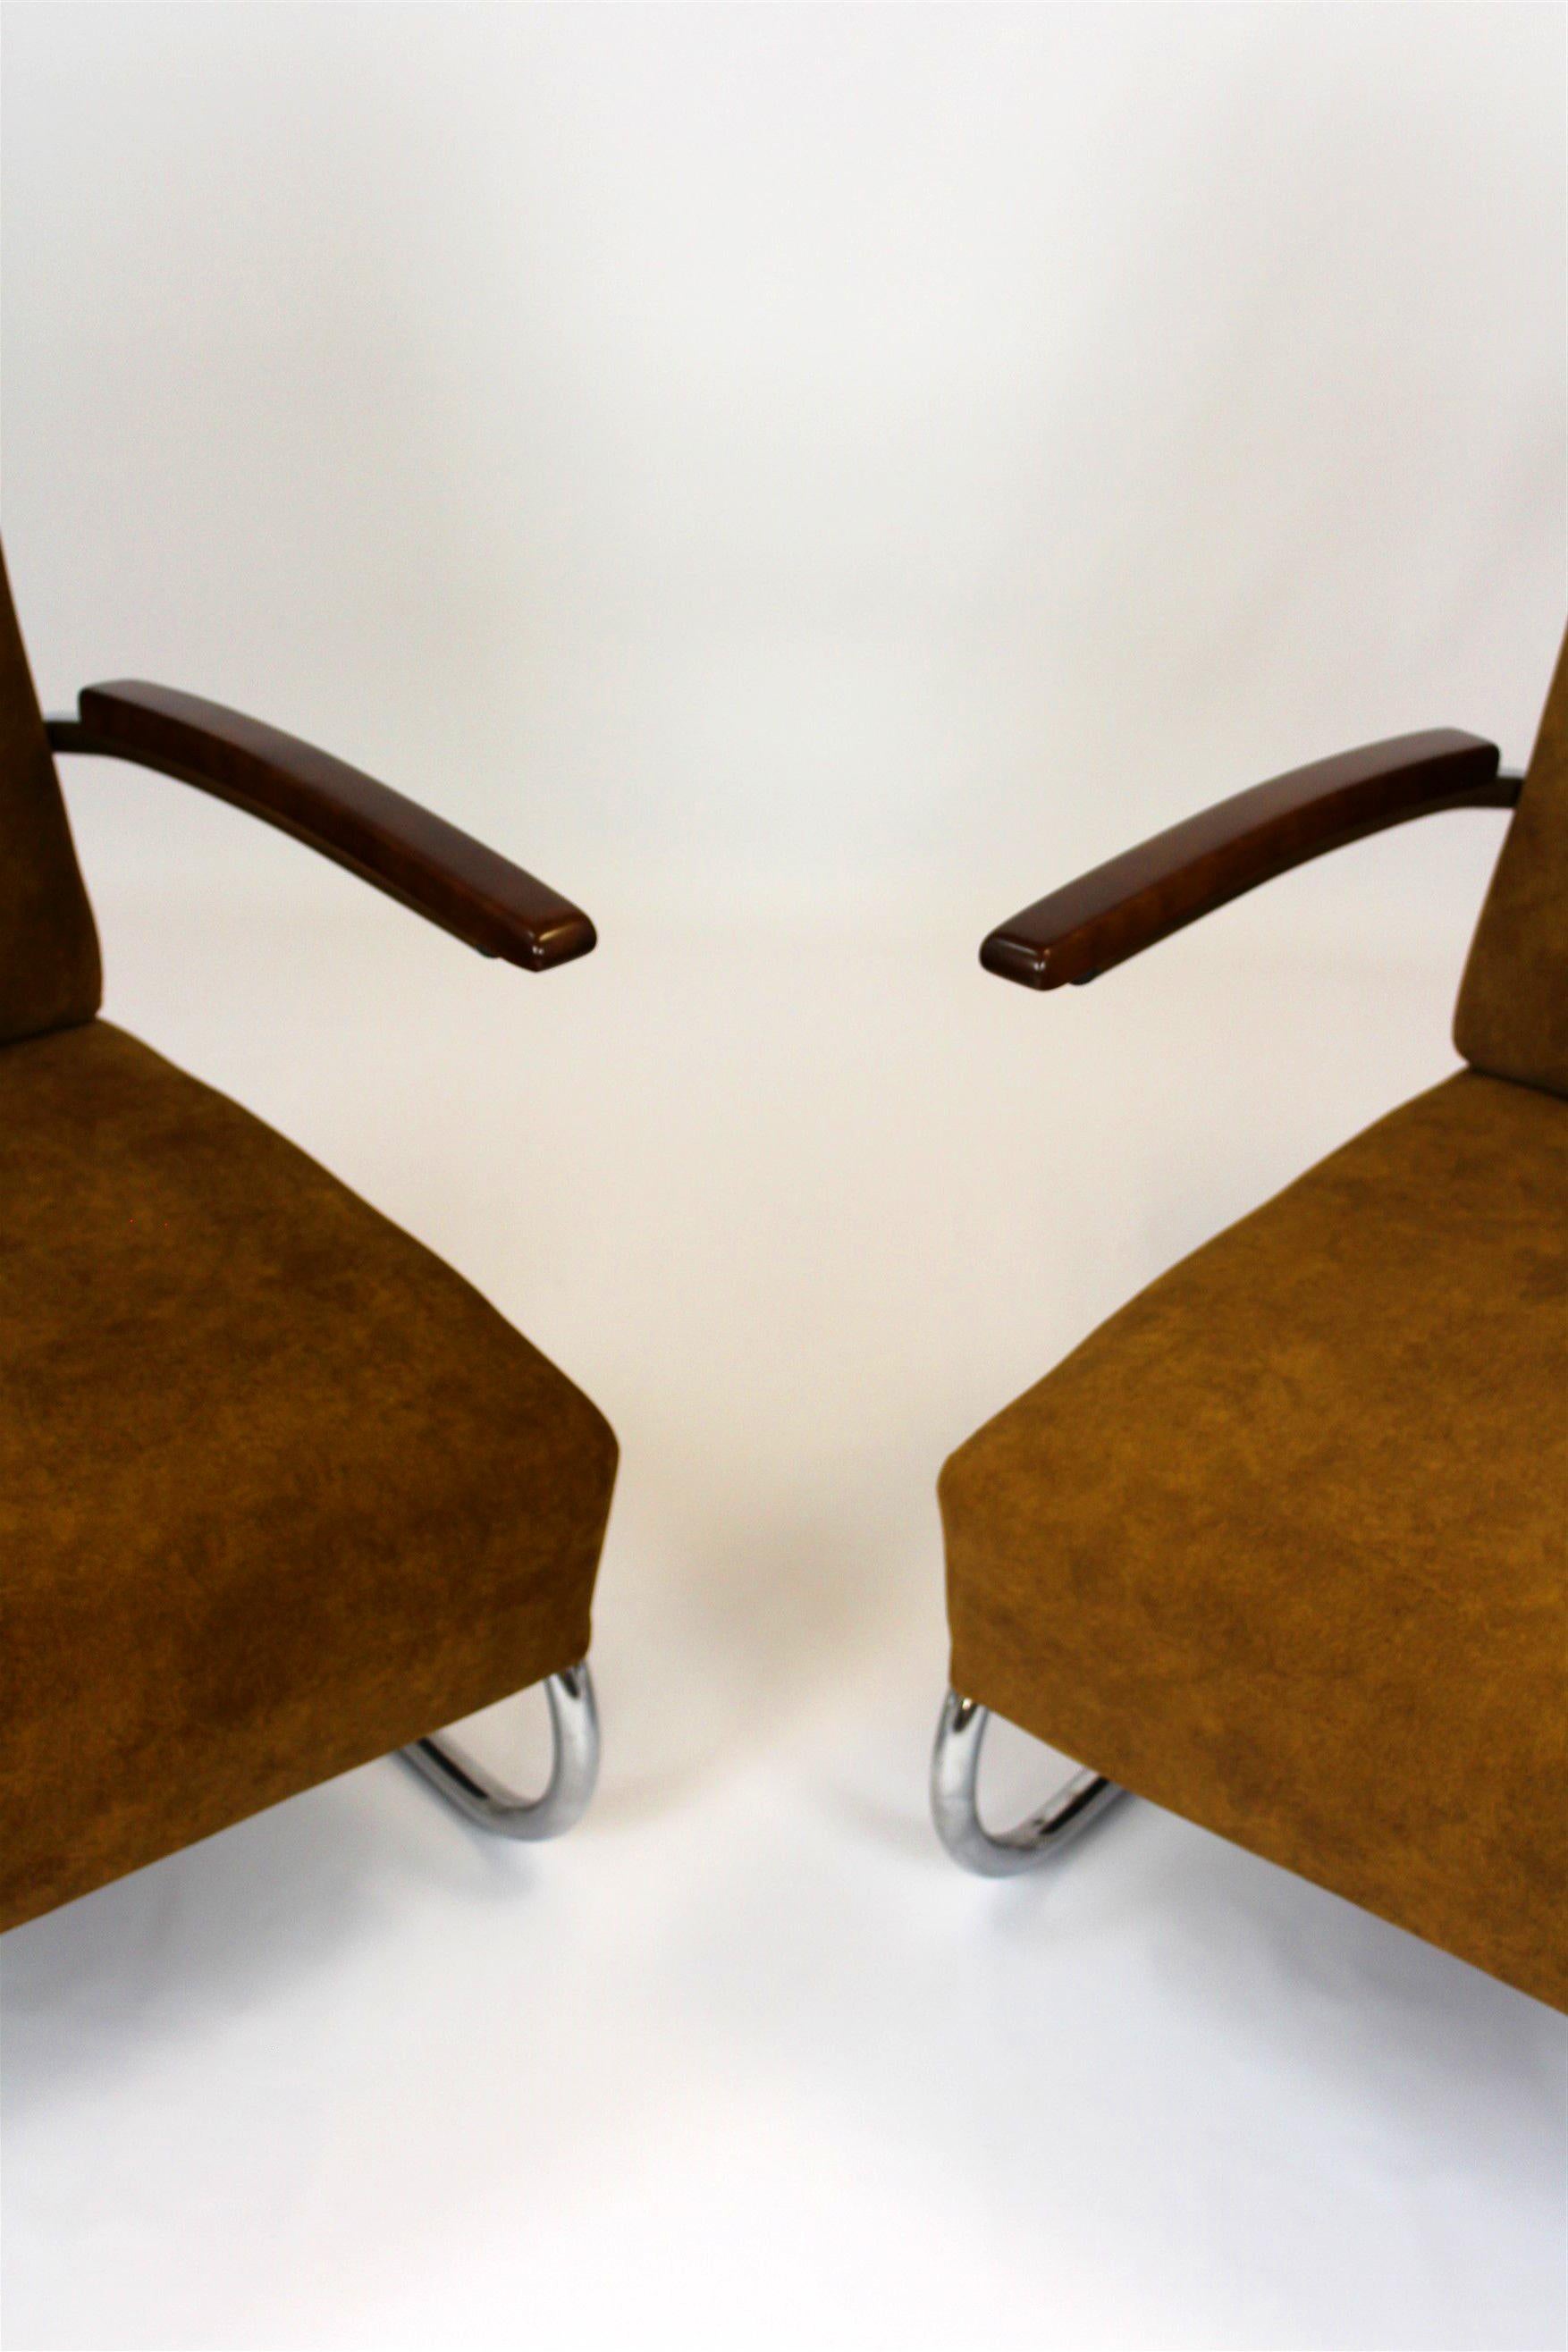 Restored Bauhaus S411 Armchairs by W. H. Gispen for Mücke Melder 1940s, Set of 2 In Good Condition For Sale In Żory, PL